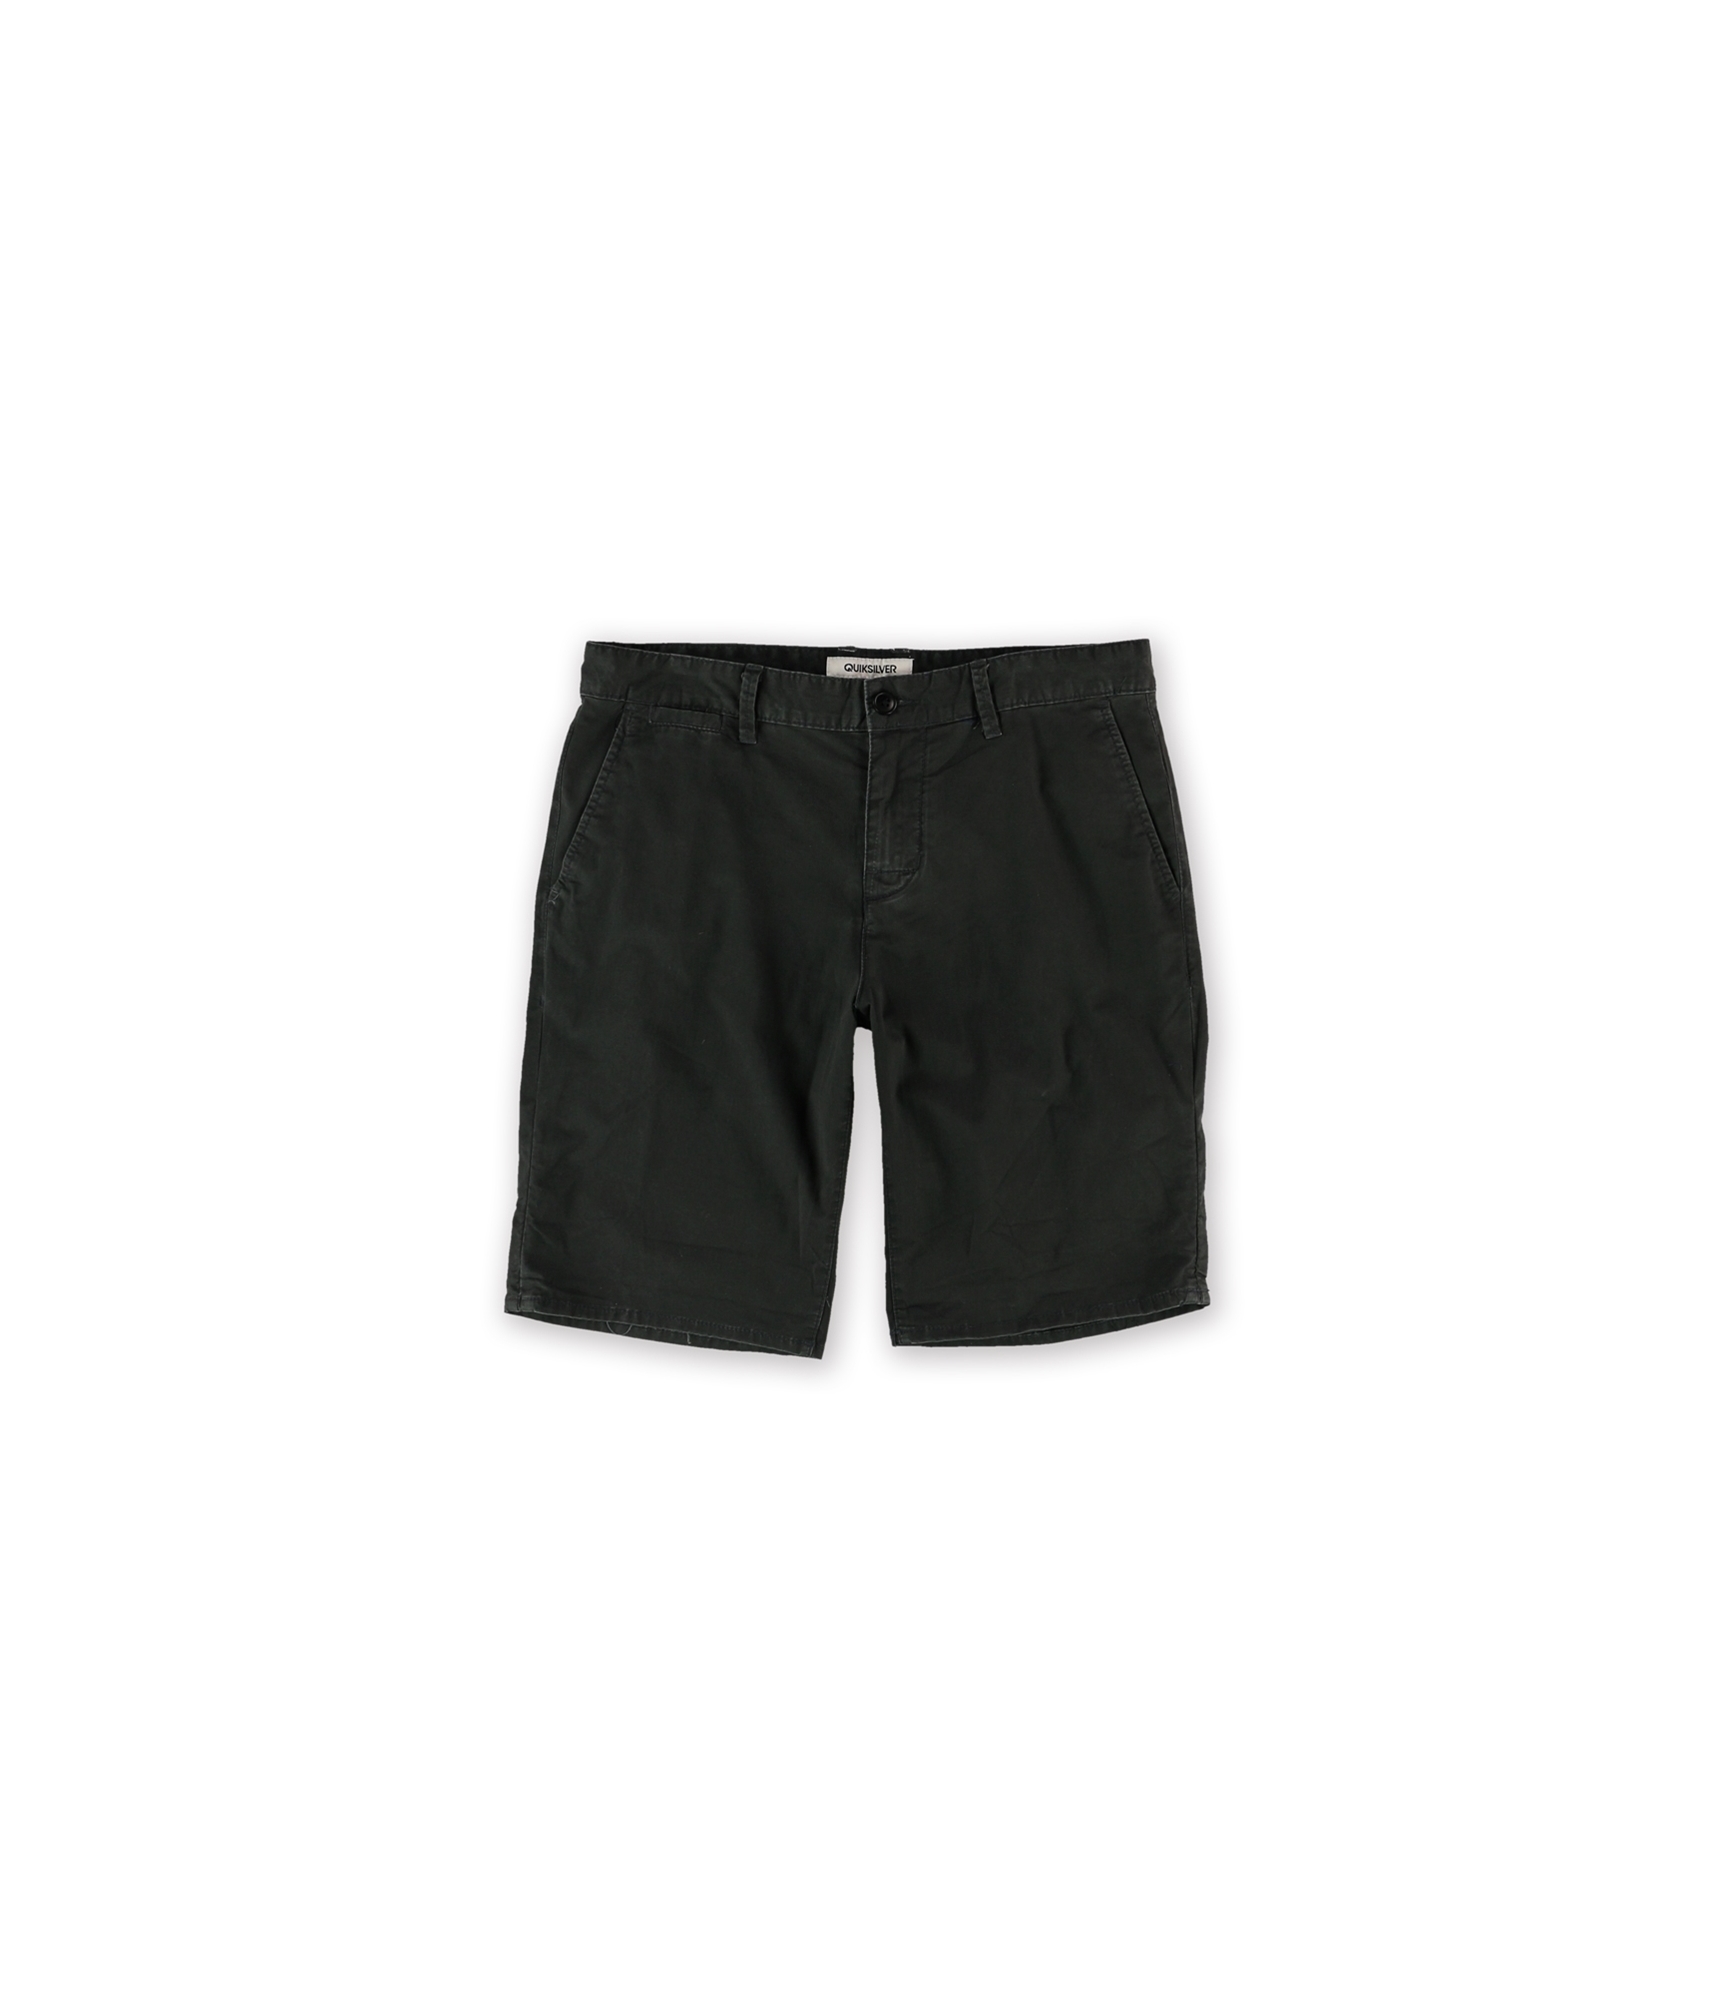 Buy a Mens Quiksilver Krandy Chino Shorts Online | TagsWeekly.com, TW1